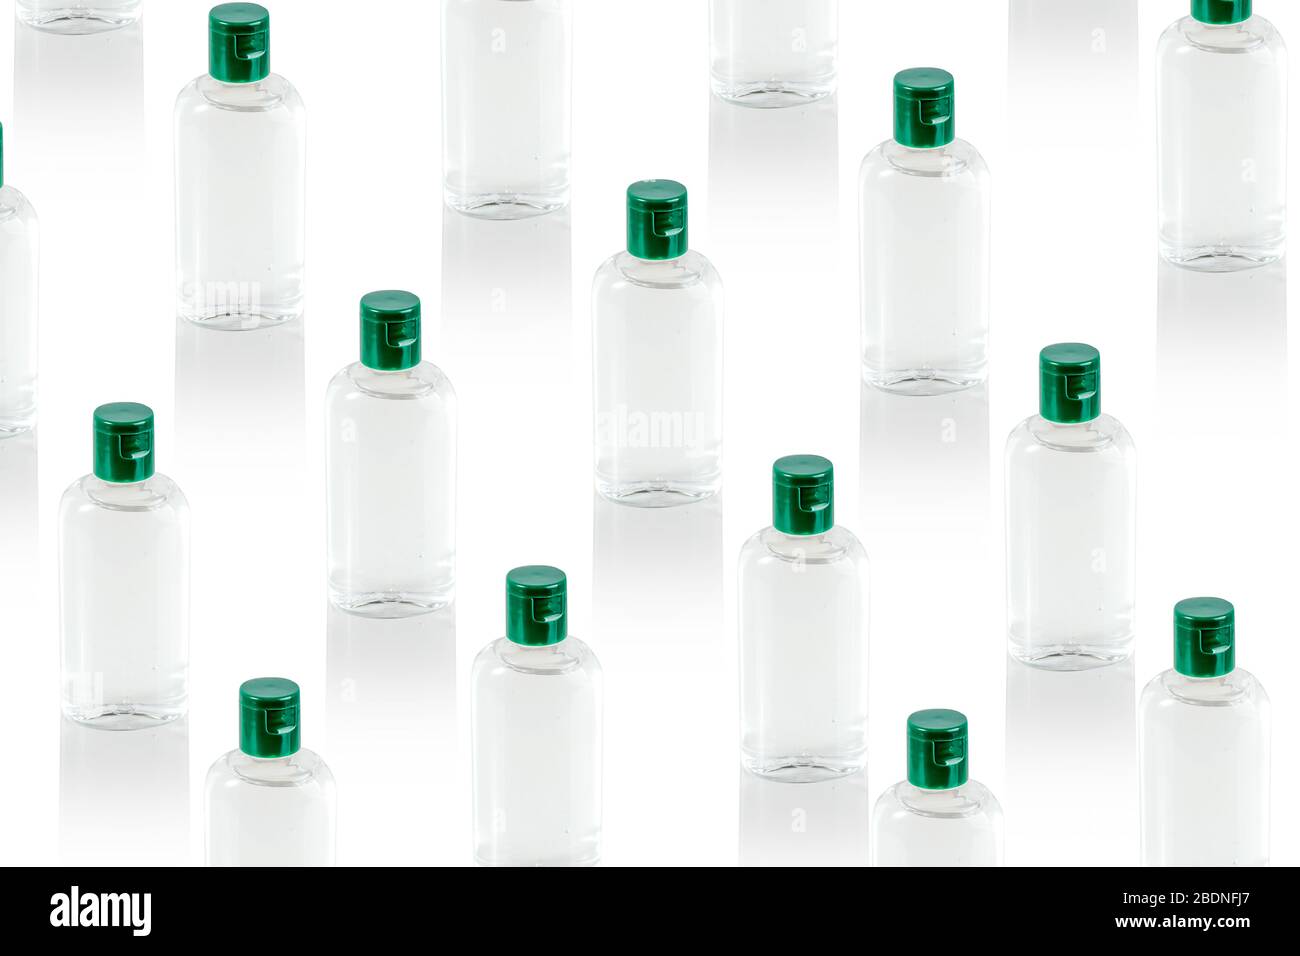 Pattern made with virus prevention medical hand sanitizer gel for hand hygiene, bottles with closed green cups. Covid-19 protection. Global pandemic concept. Stock Photo